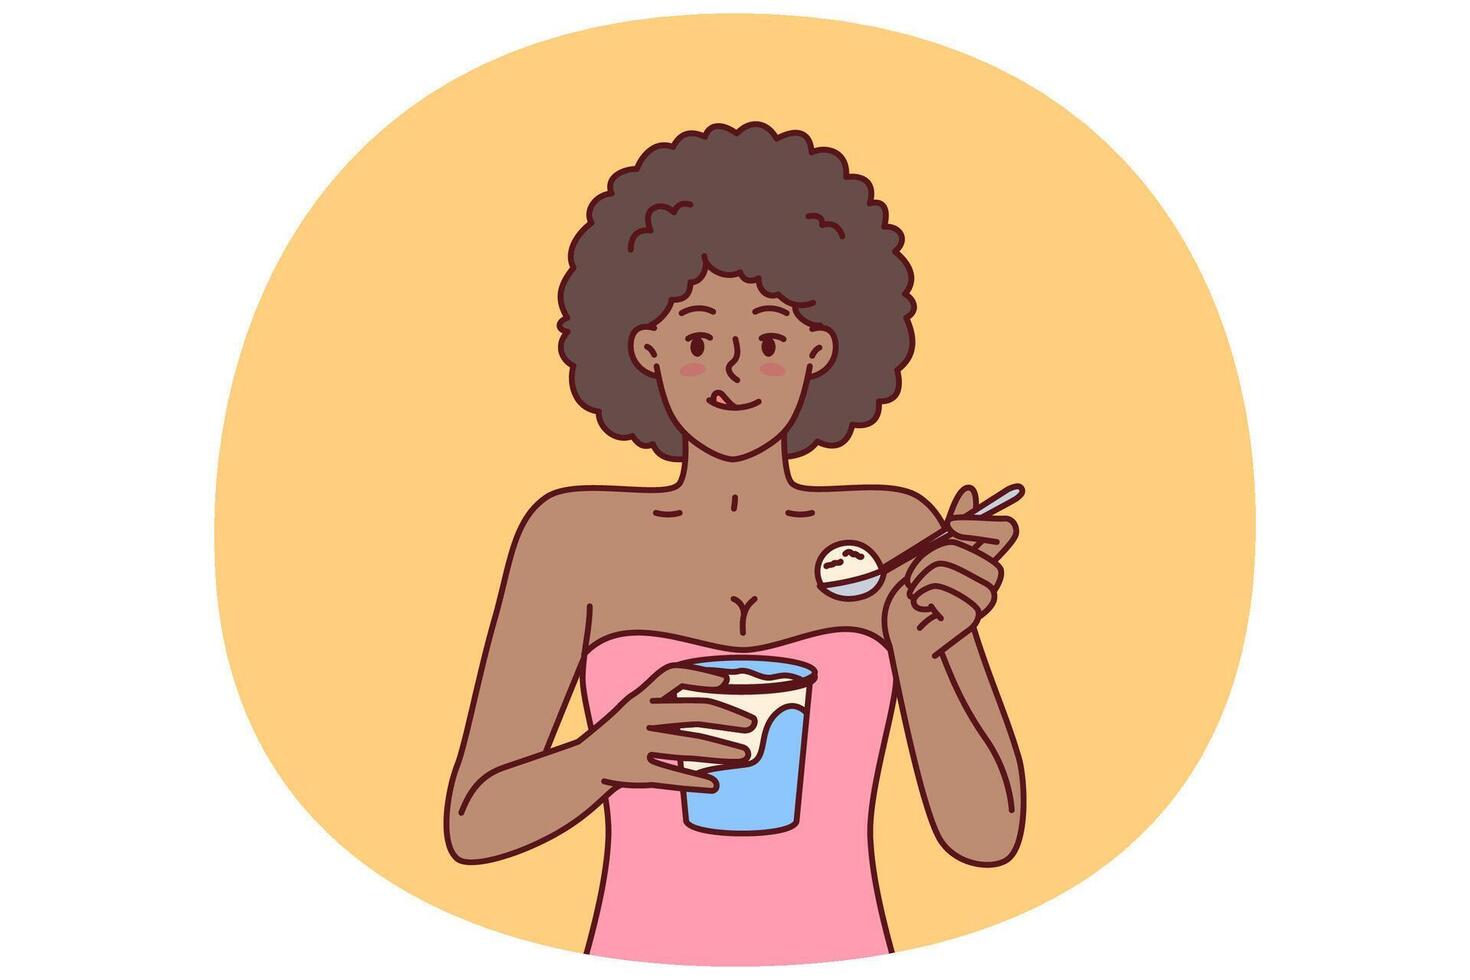 African American woman eating ice cream enjoying cold dessert to cool down after hot walk vector